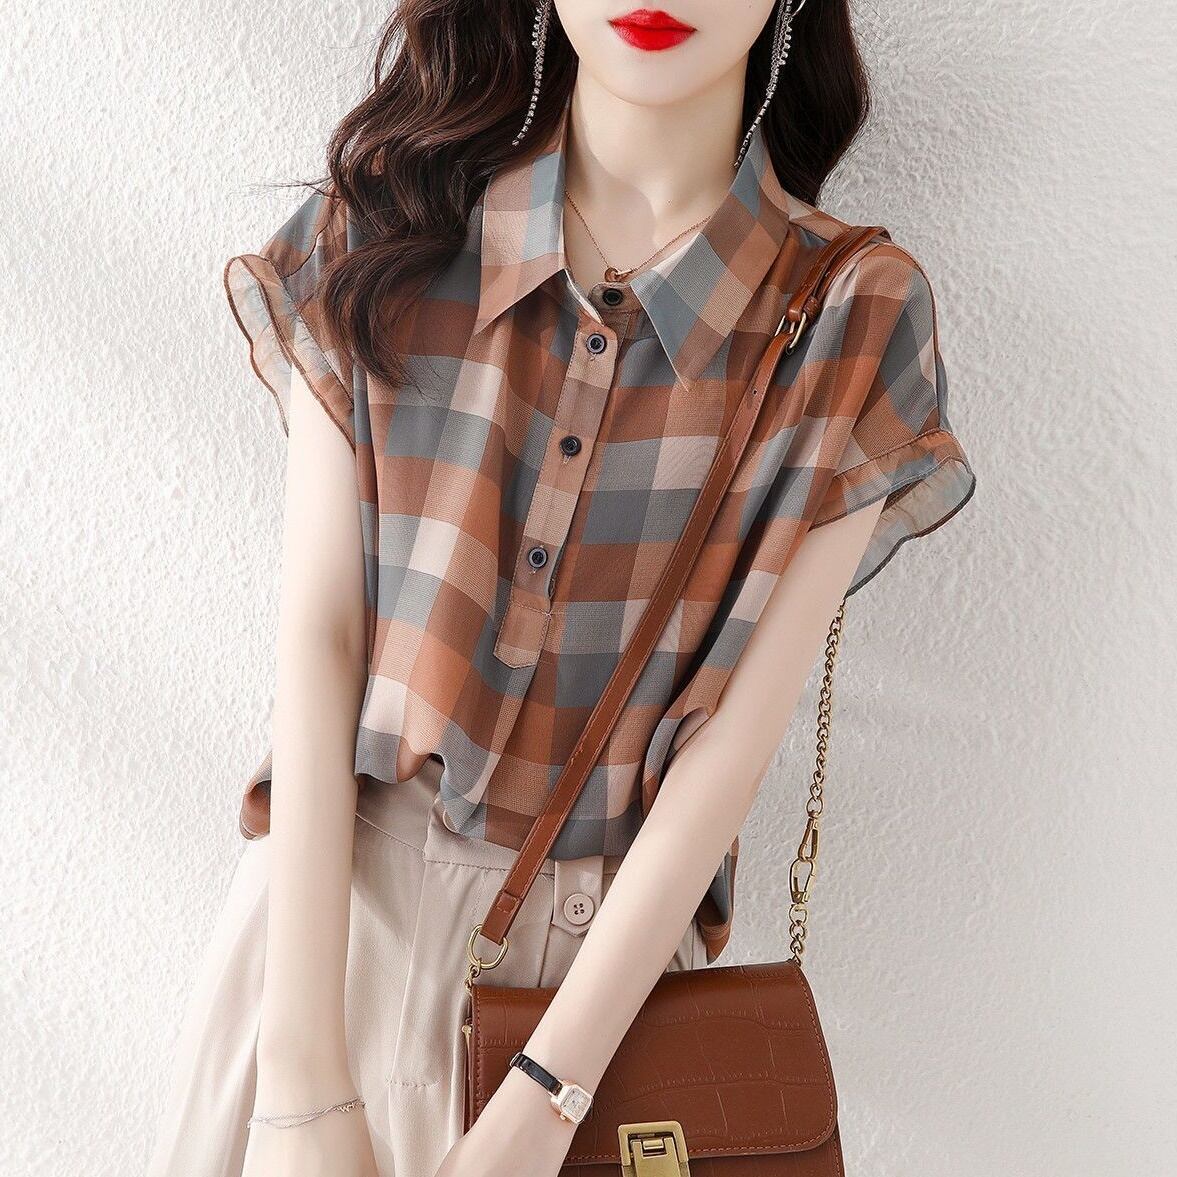 Autumn-Color Checkered Short Sleeve Blouse  T1121